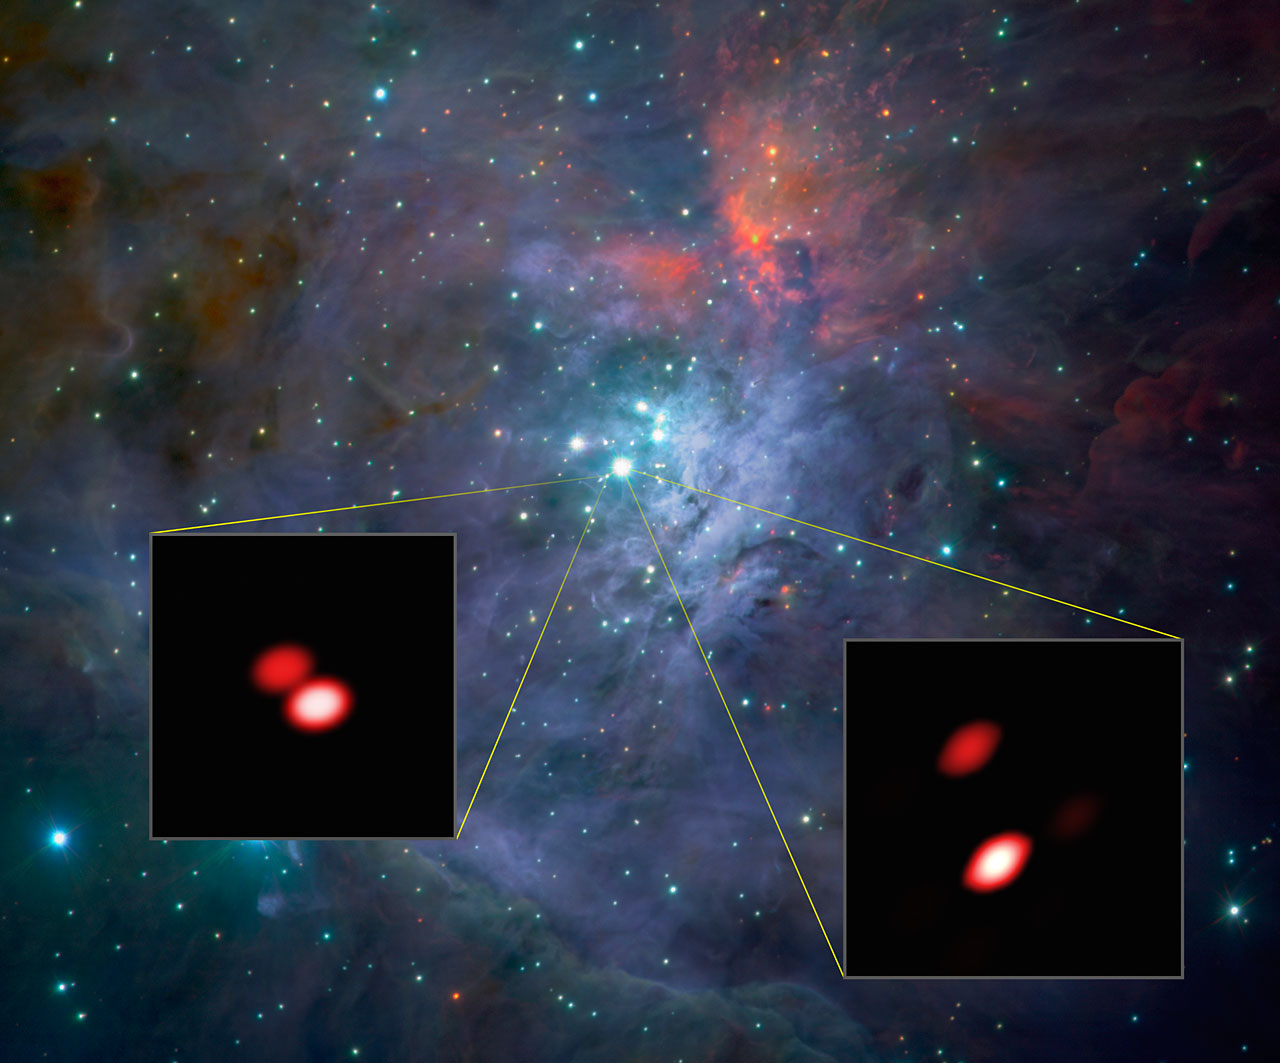 GRAVITY discovers new double star in Orion Trapezium Cluster